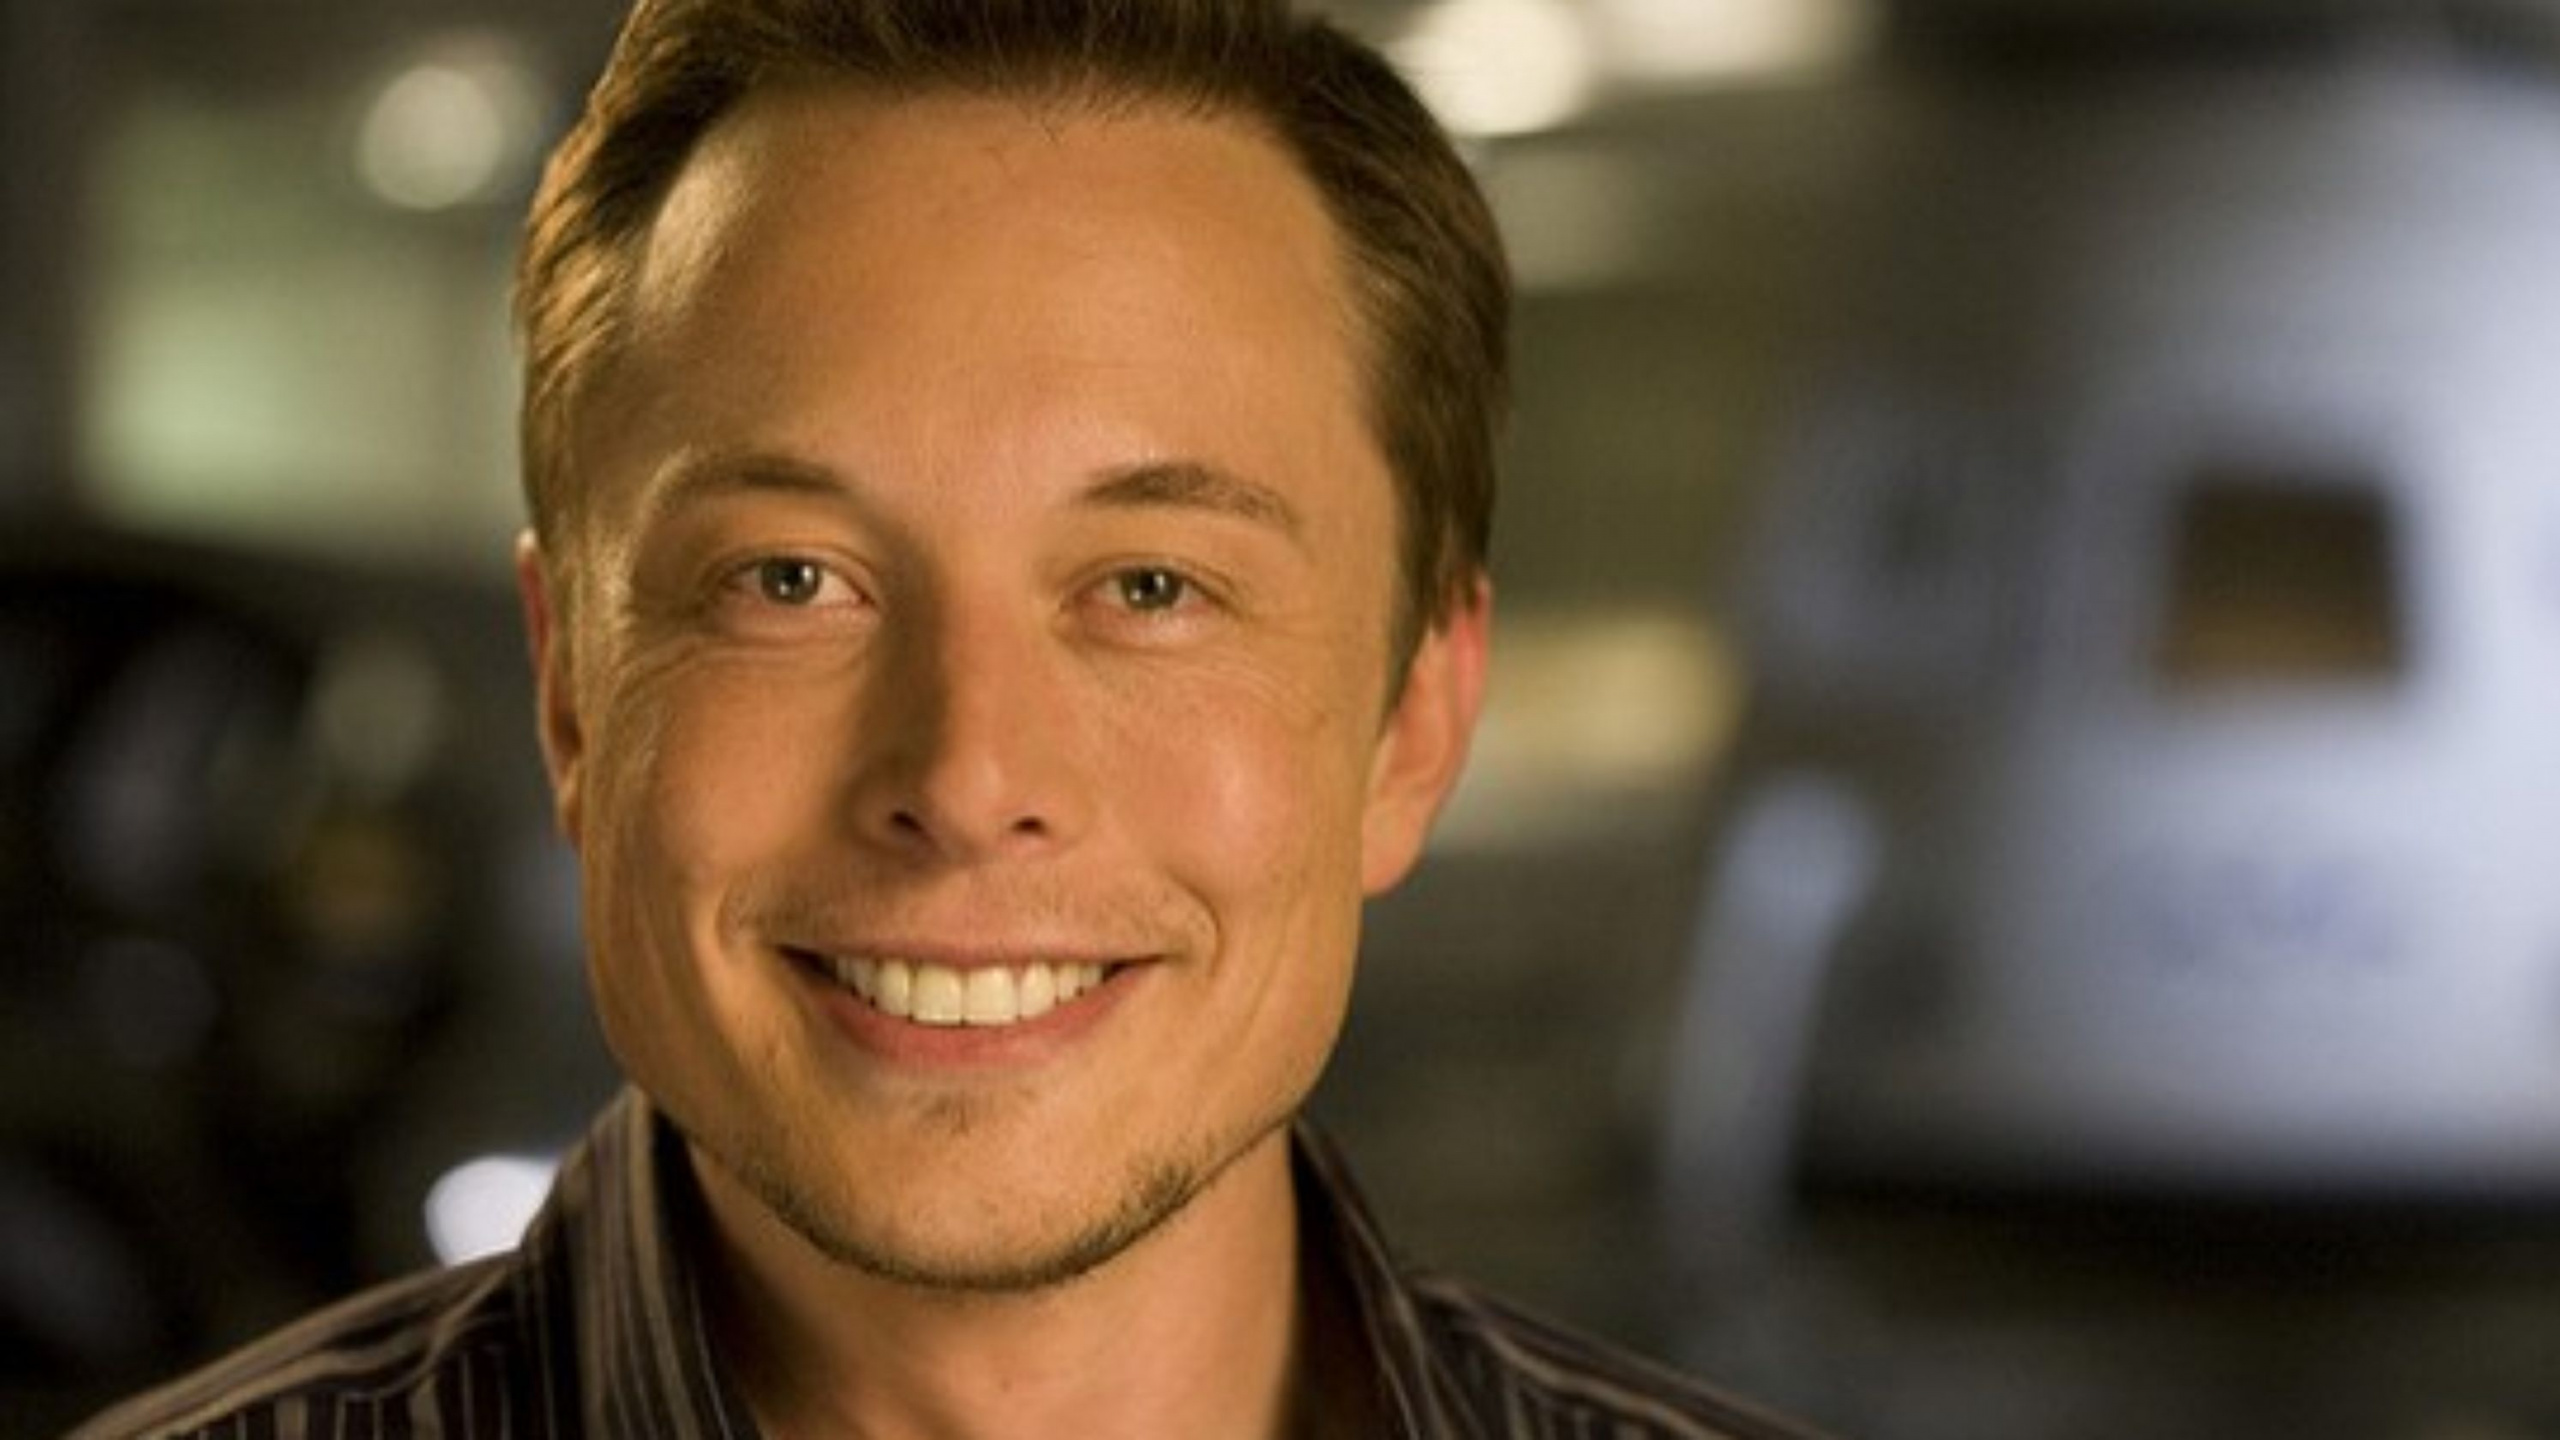 Elon Musk, Face, Facial Expression, Forehead, Smile. Wallpaper in 2560x1440 Resolution